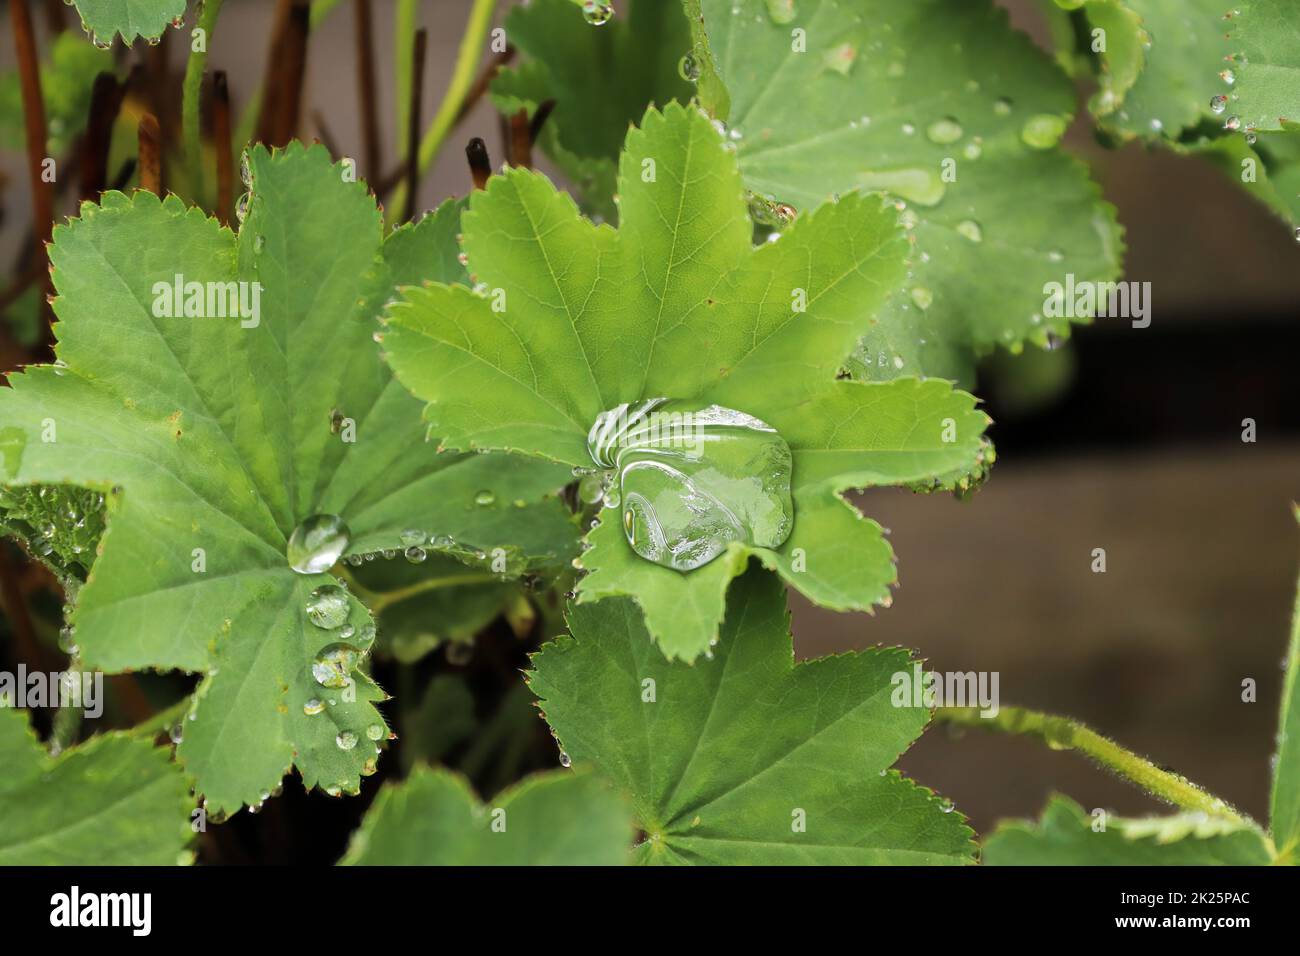 Closeup view of leaves on a Ladys Mantle covered in water Stock Photo